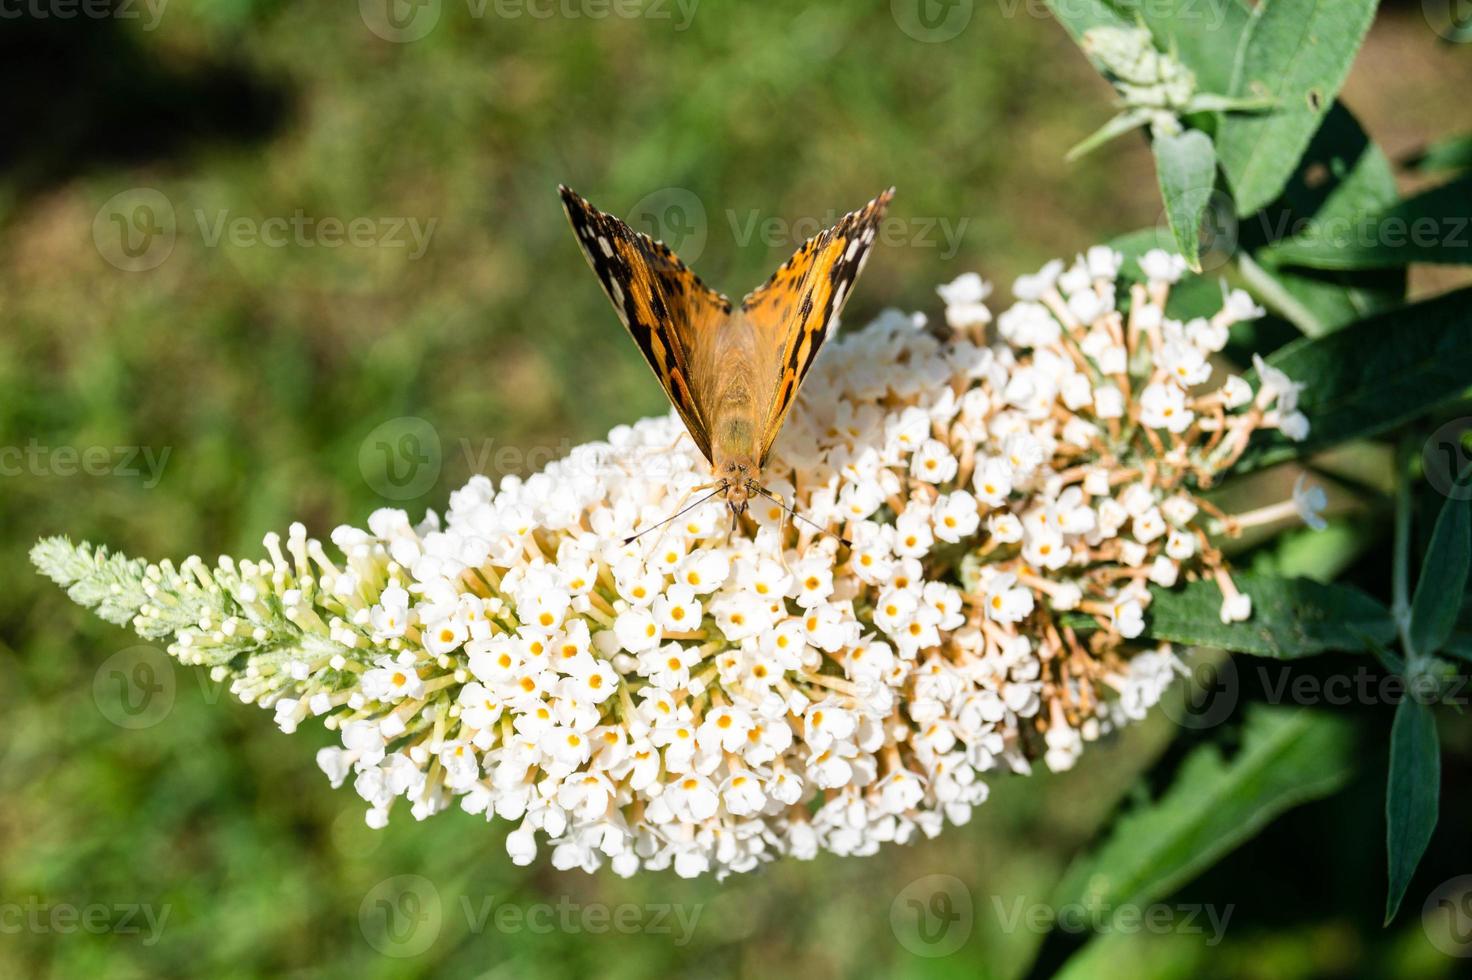 Butterfly Vanessa Cardui or Cynthia cardui in the garden photo